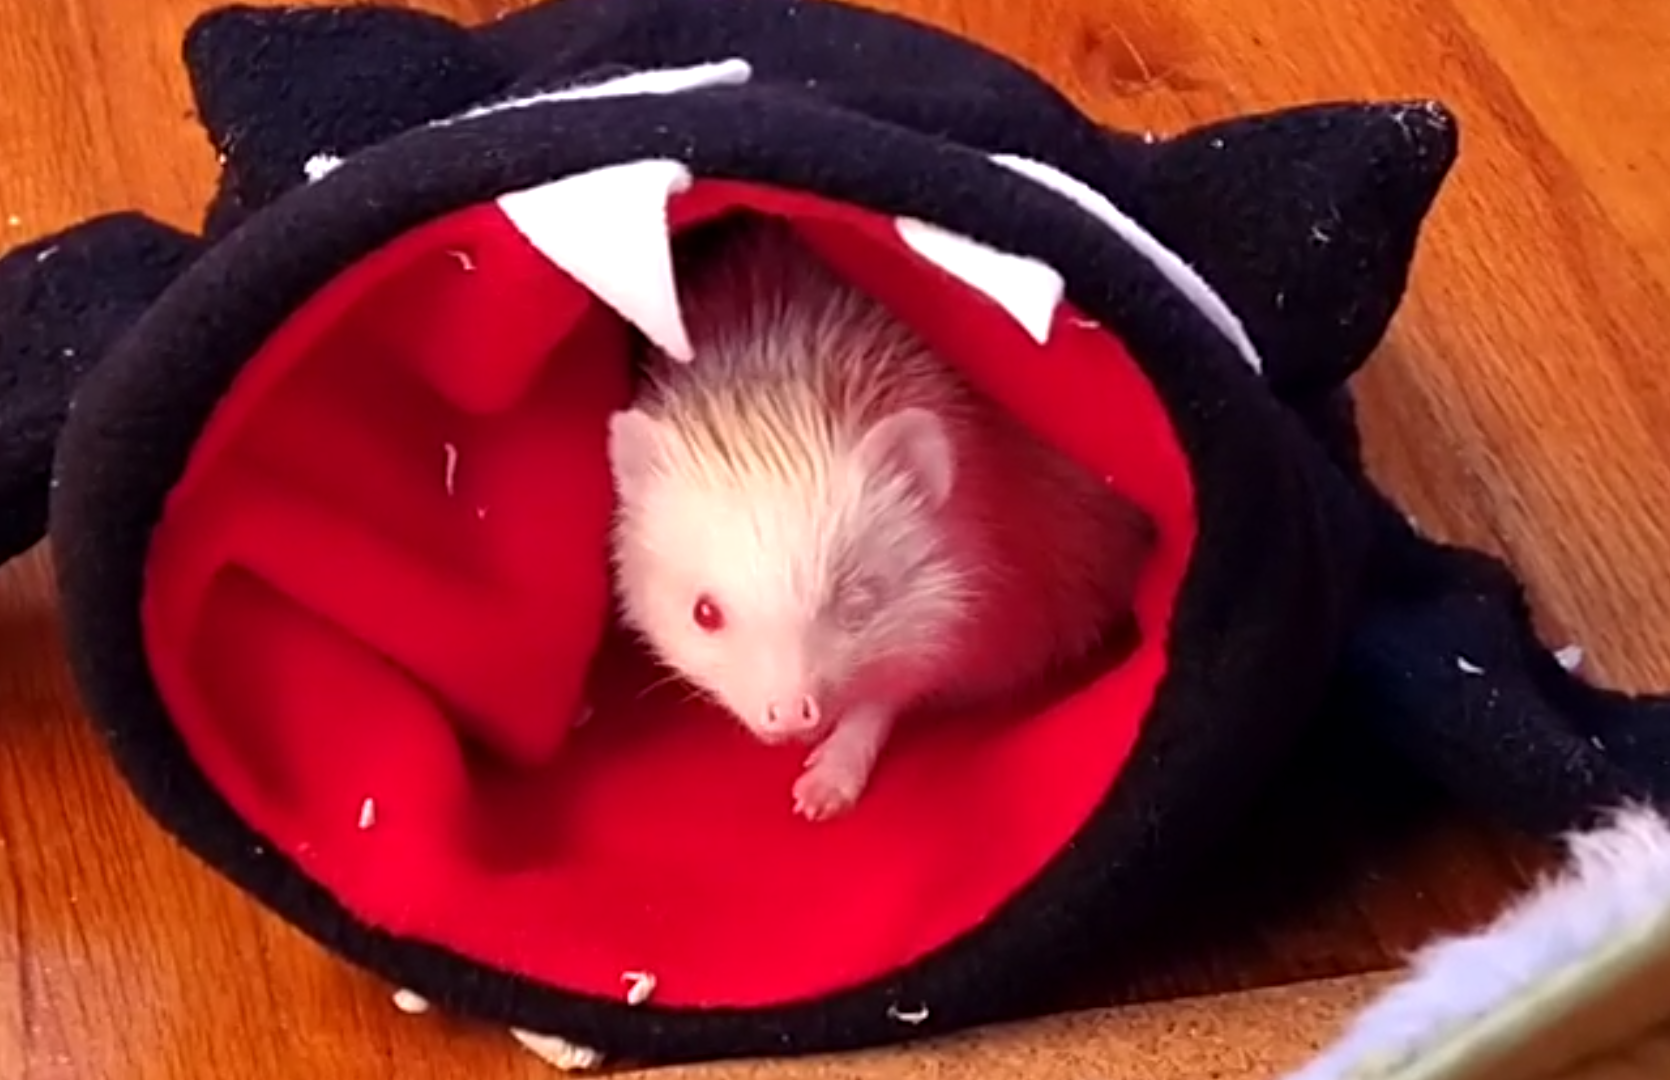 A One-Eyed Hedgehog Takes Home the Gold